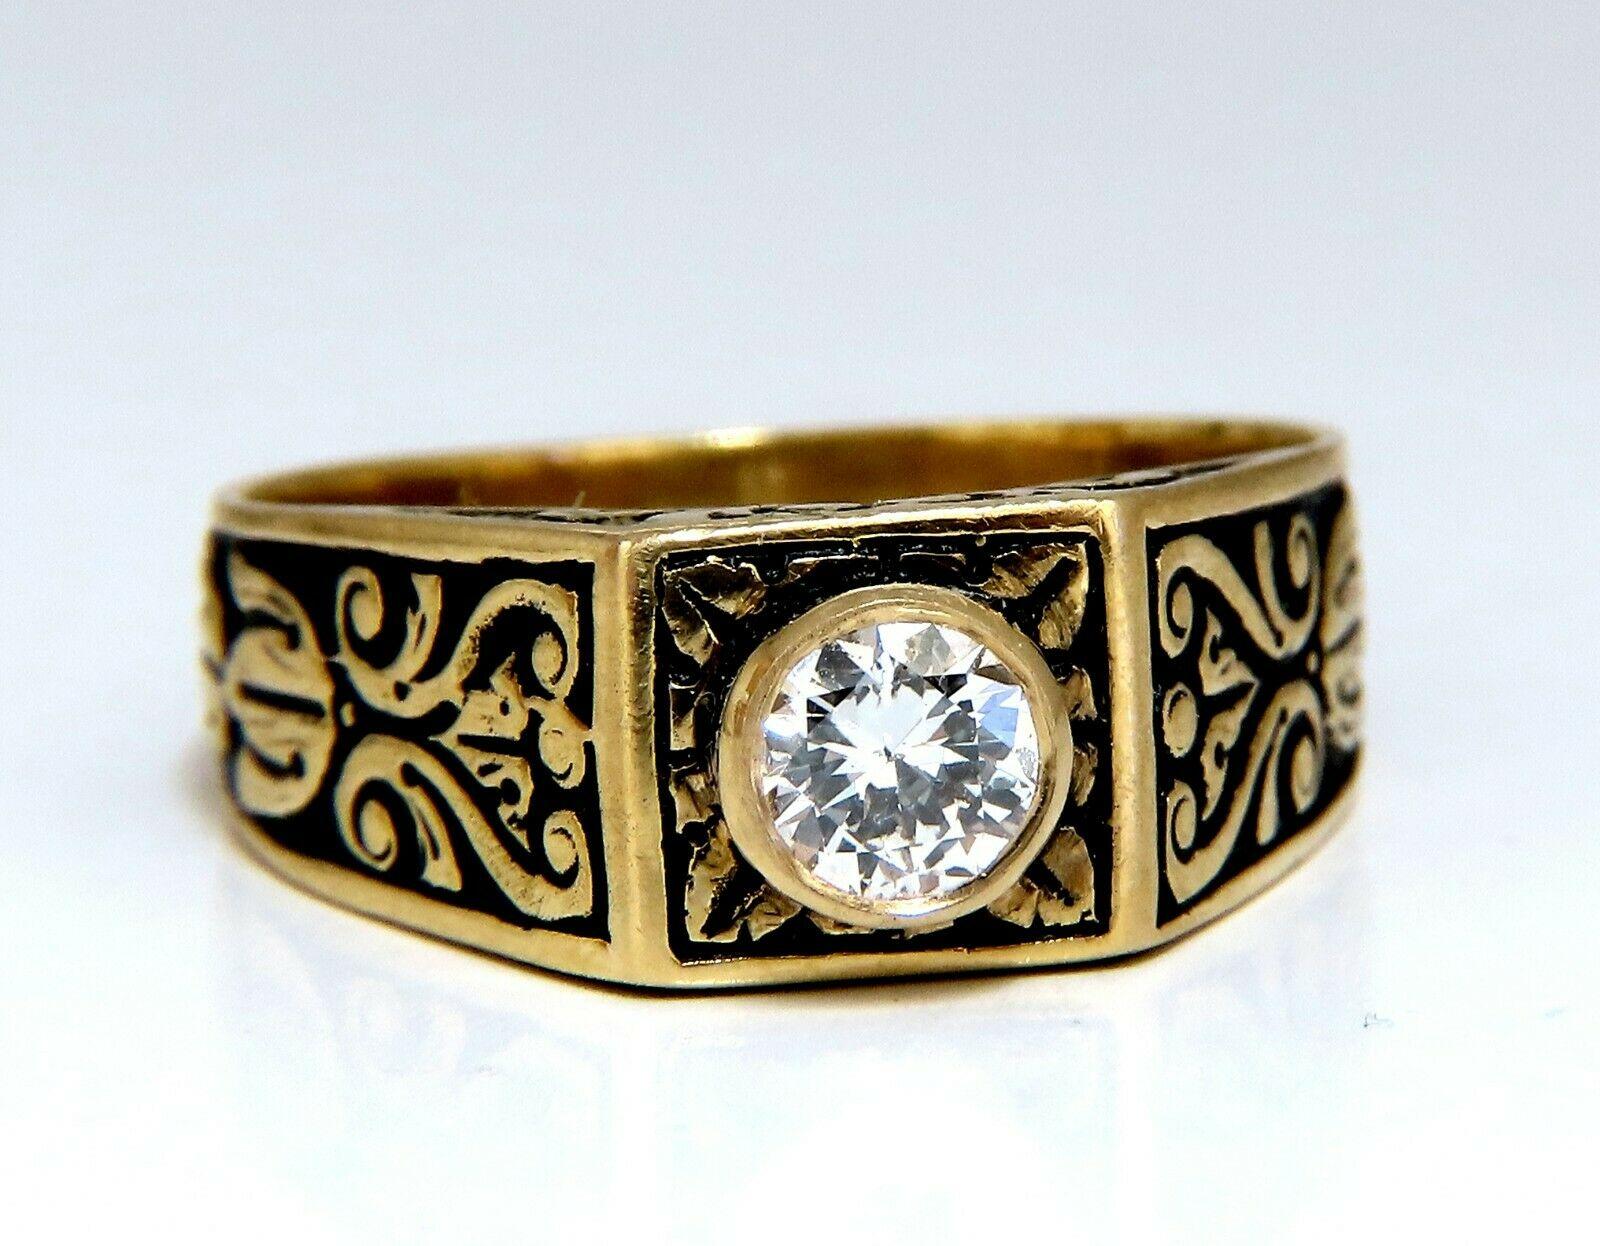 Victorian Vintage Solitaire 

.40ct. Natural round diamond ring

 Si-1 clarity 

H-color

Very good Cut / Full cut Brilliant

18kt yellow gold

Ring size: 9.5

(Complimentary resizing available)

Ring is 8.2mm wide

6mm depth.

$5000 Appraisal